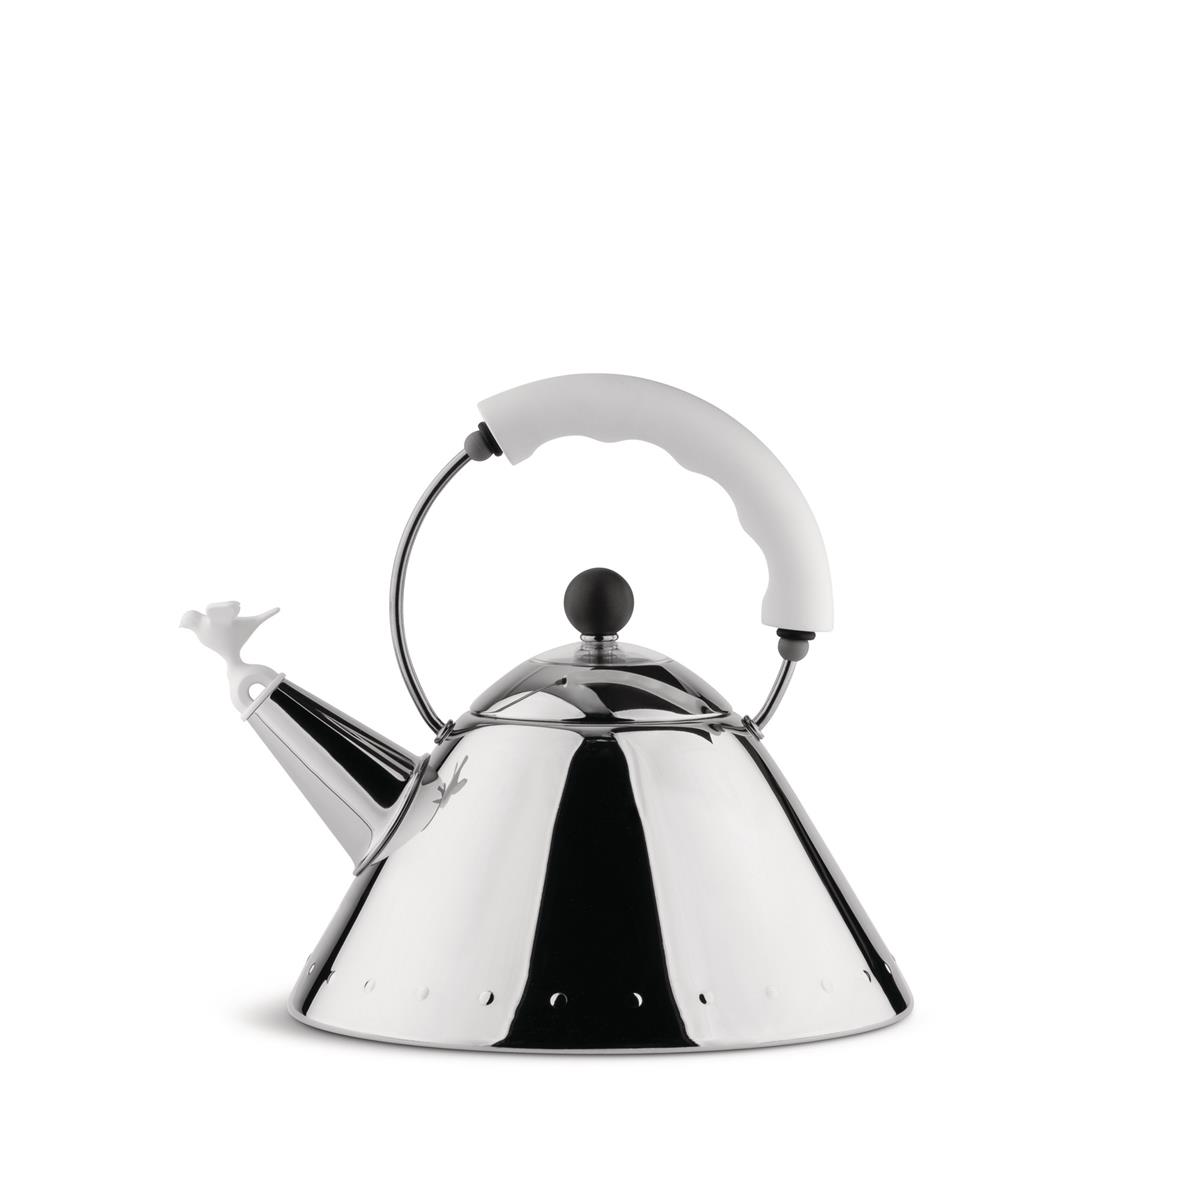 photo kettle in 18/10 stainless steel suitable for induction